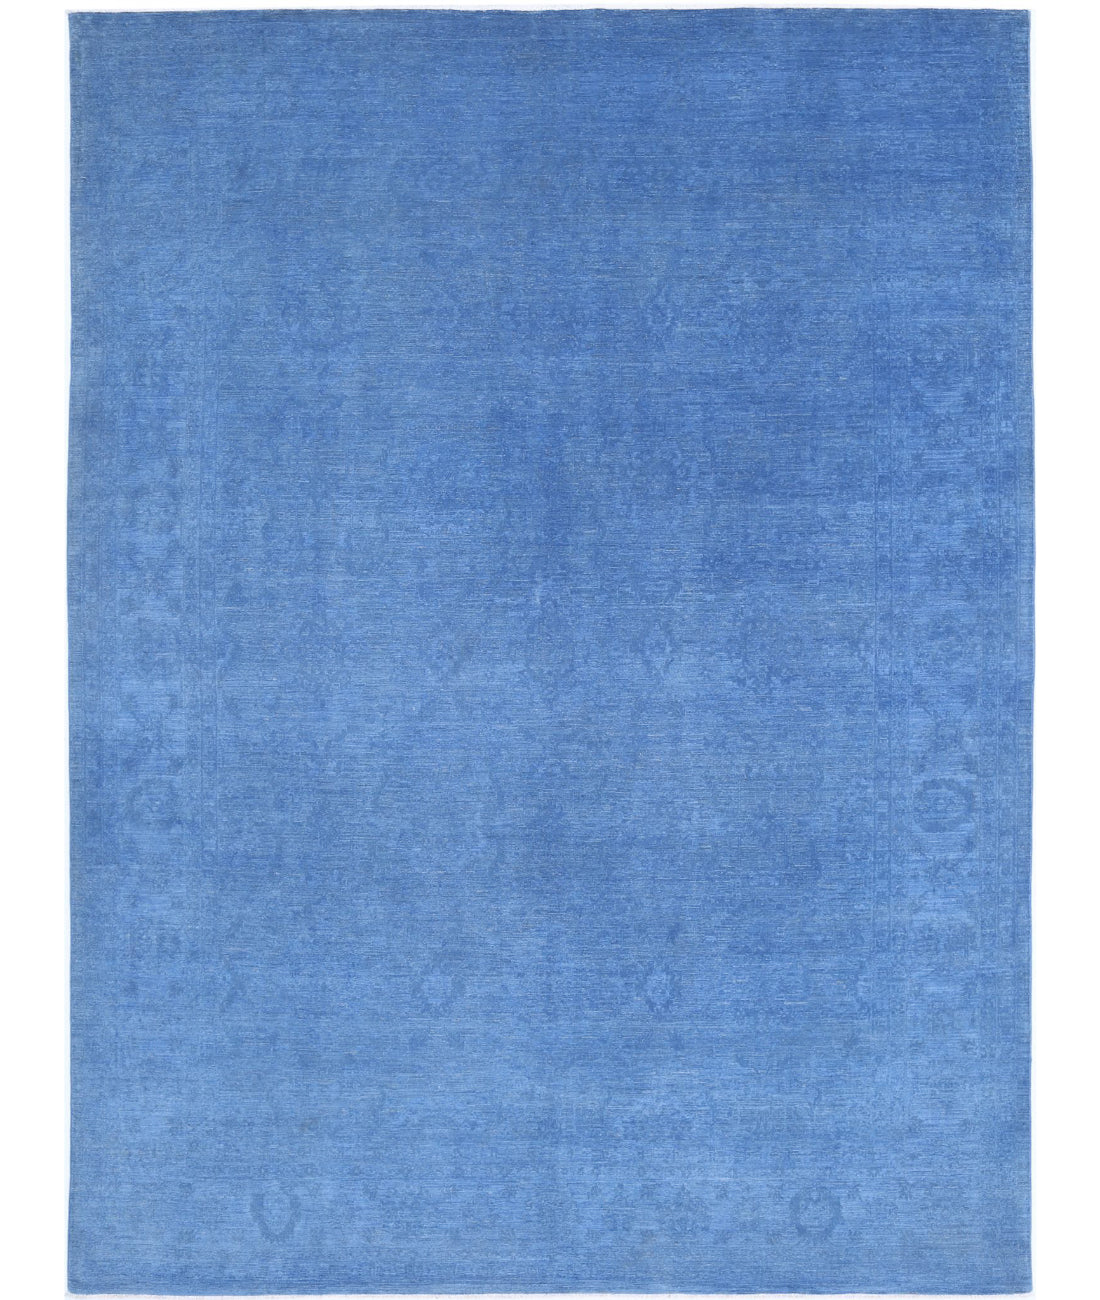 Hand Knotted Overdye Wool Rug - 8'10'' x 11'8'' 8'10'' x 11'8'' (265 X 350) / Blue / Blue